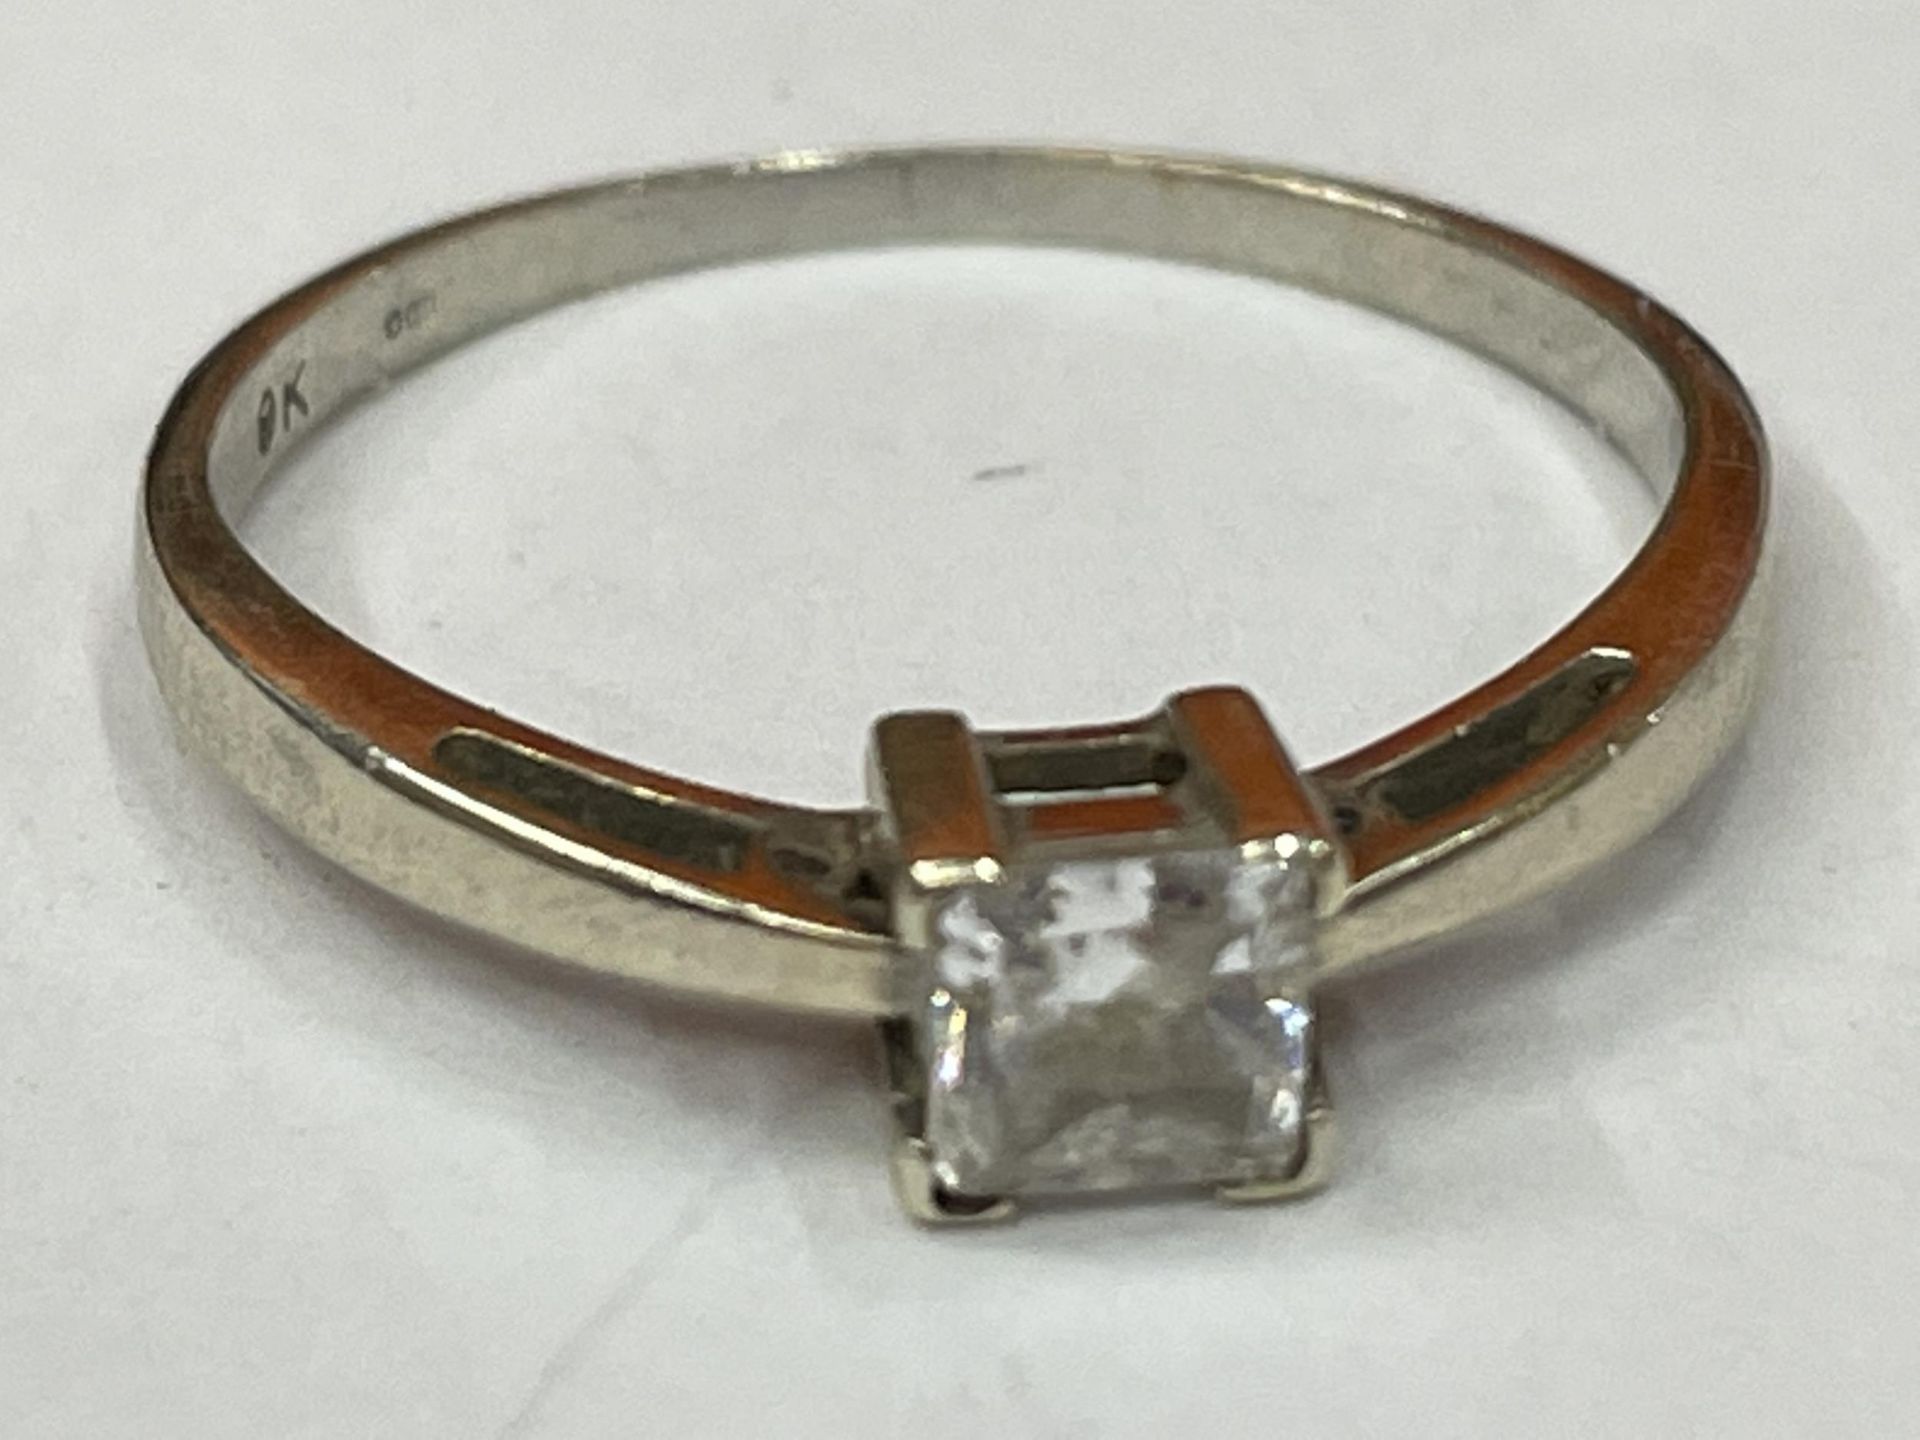 A 9 CARAT GOLD RING WITH A SQUARE SOLITAIRE STONE SIZE M/N